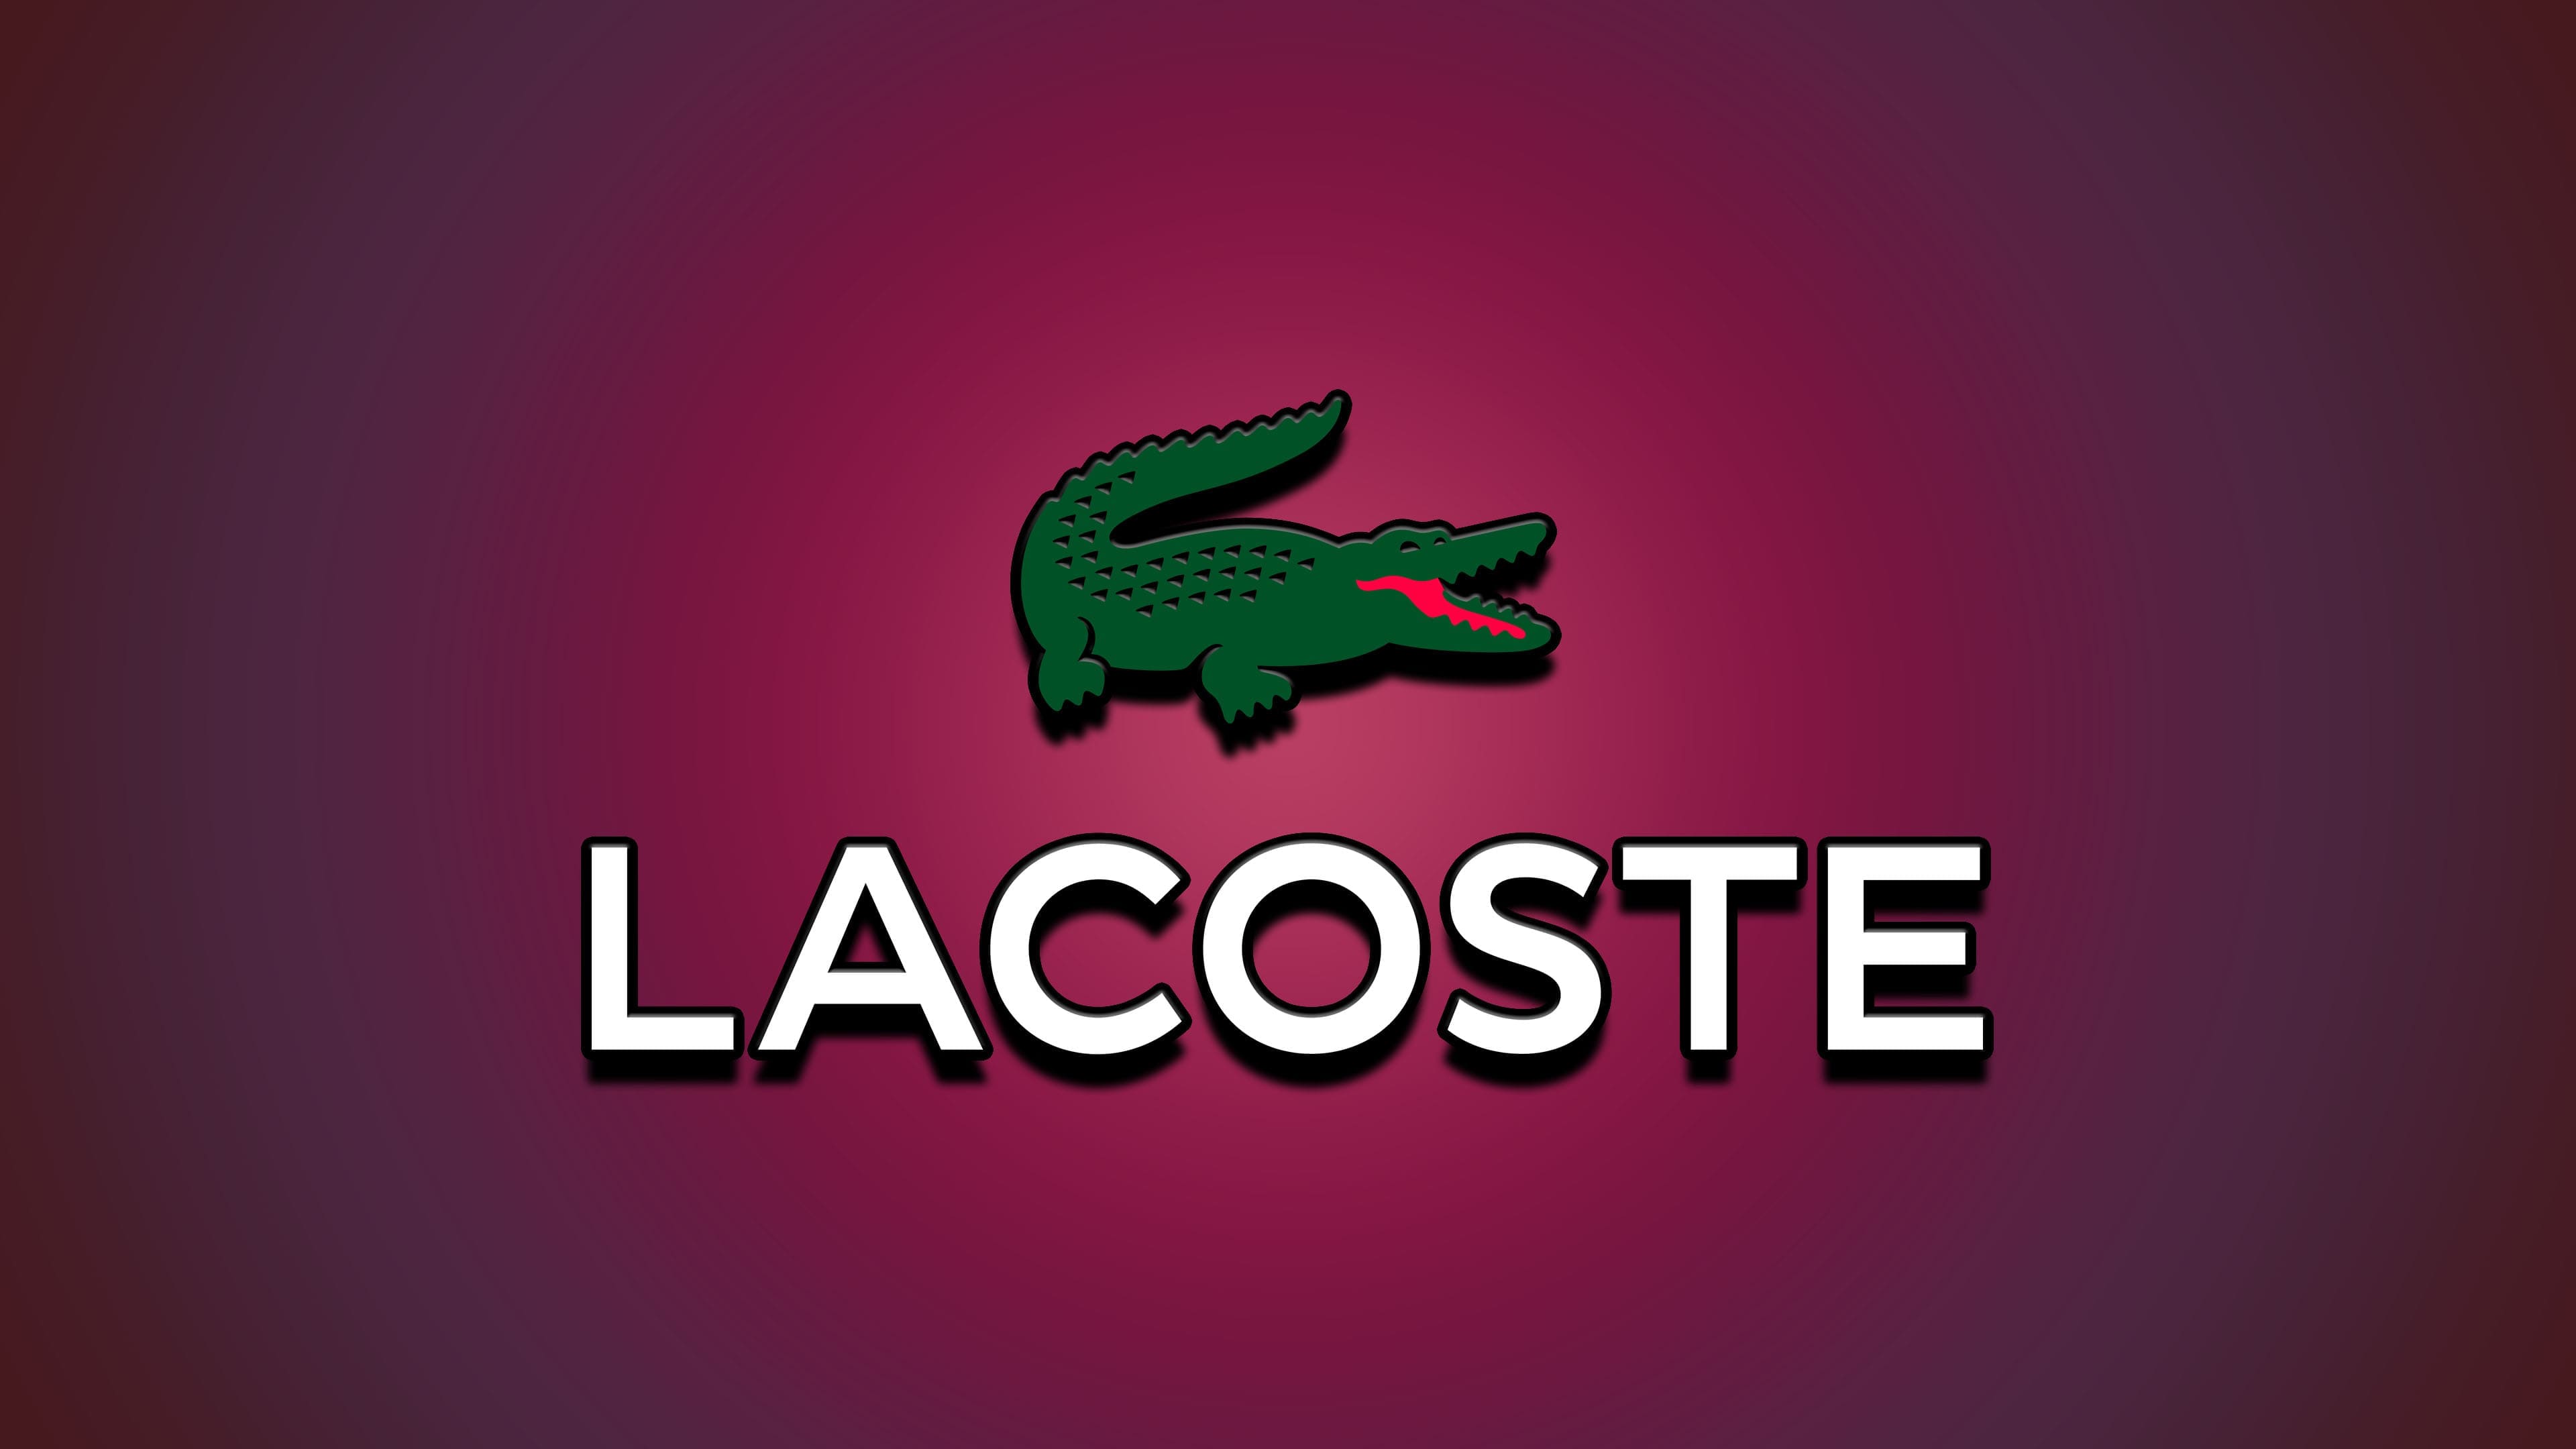 products, lacoste, logo